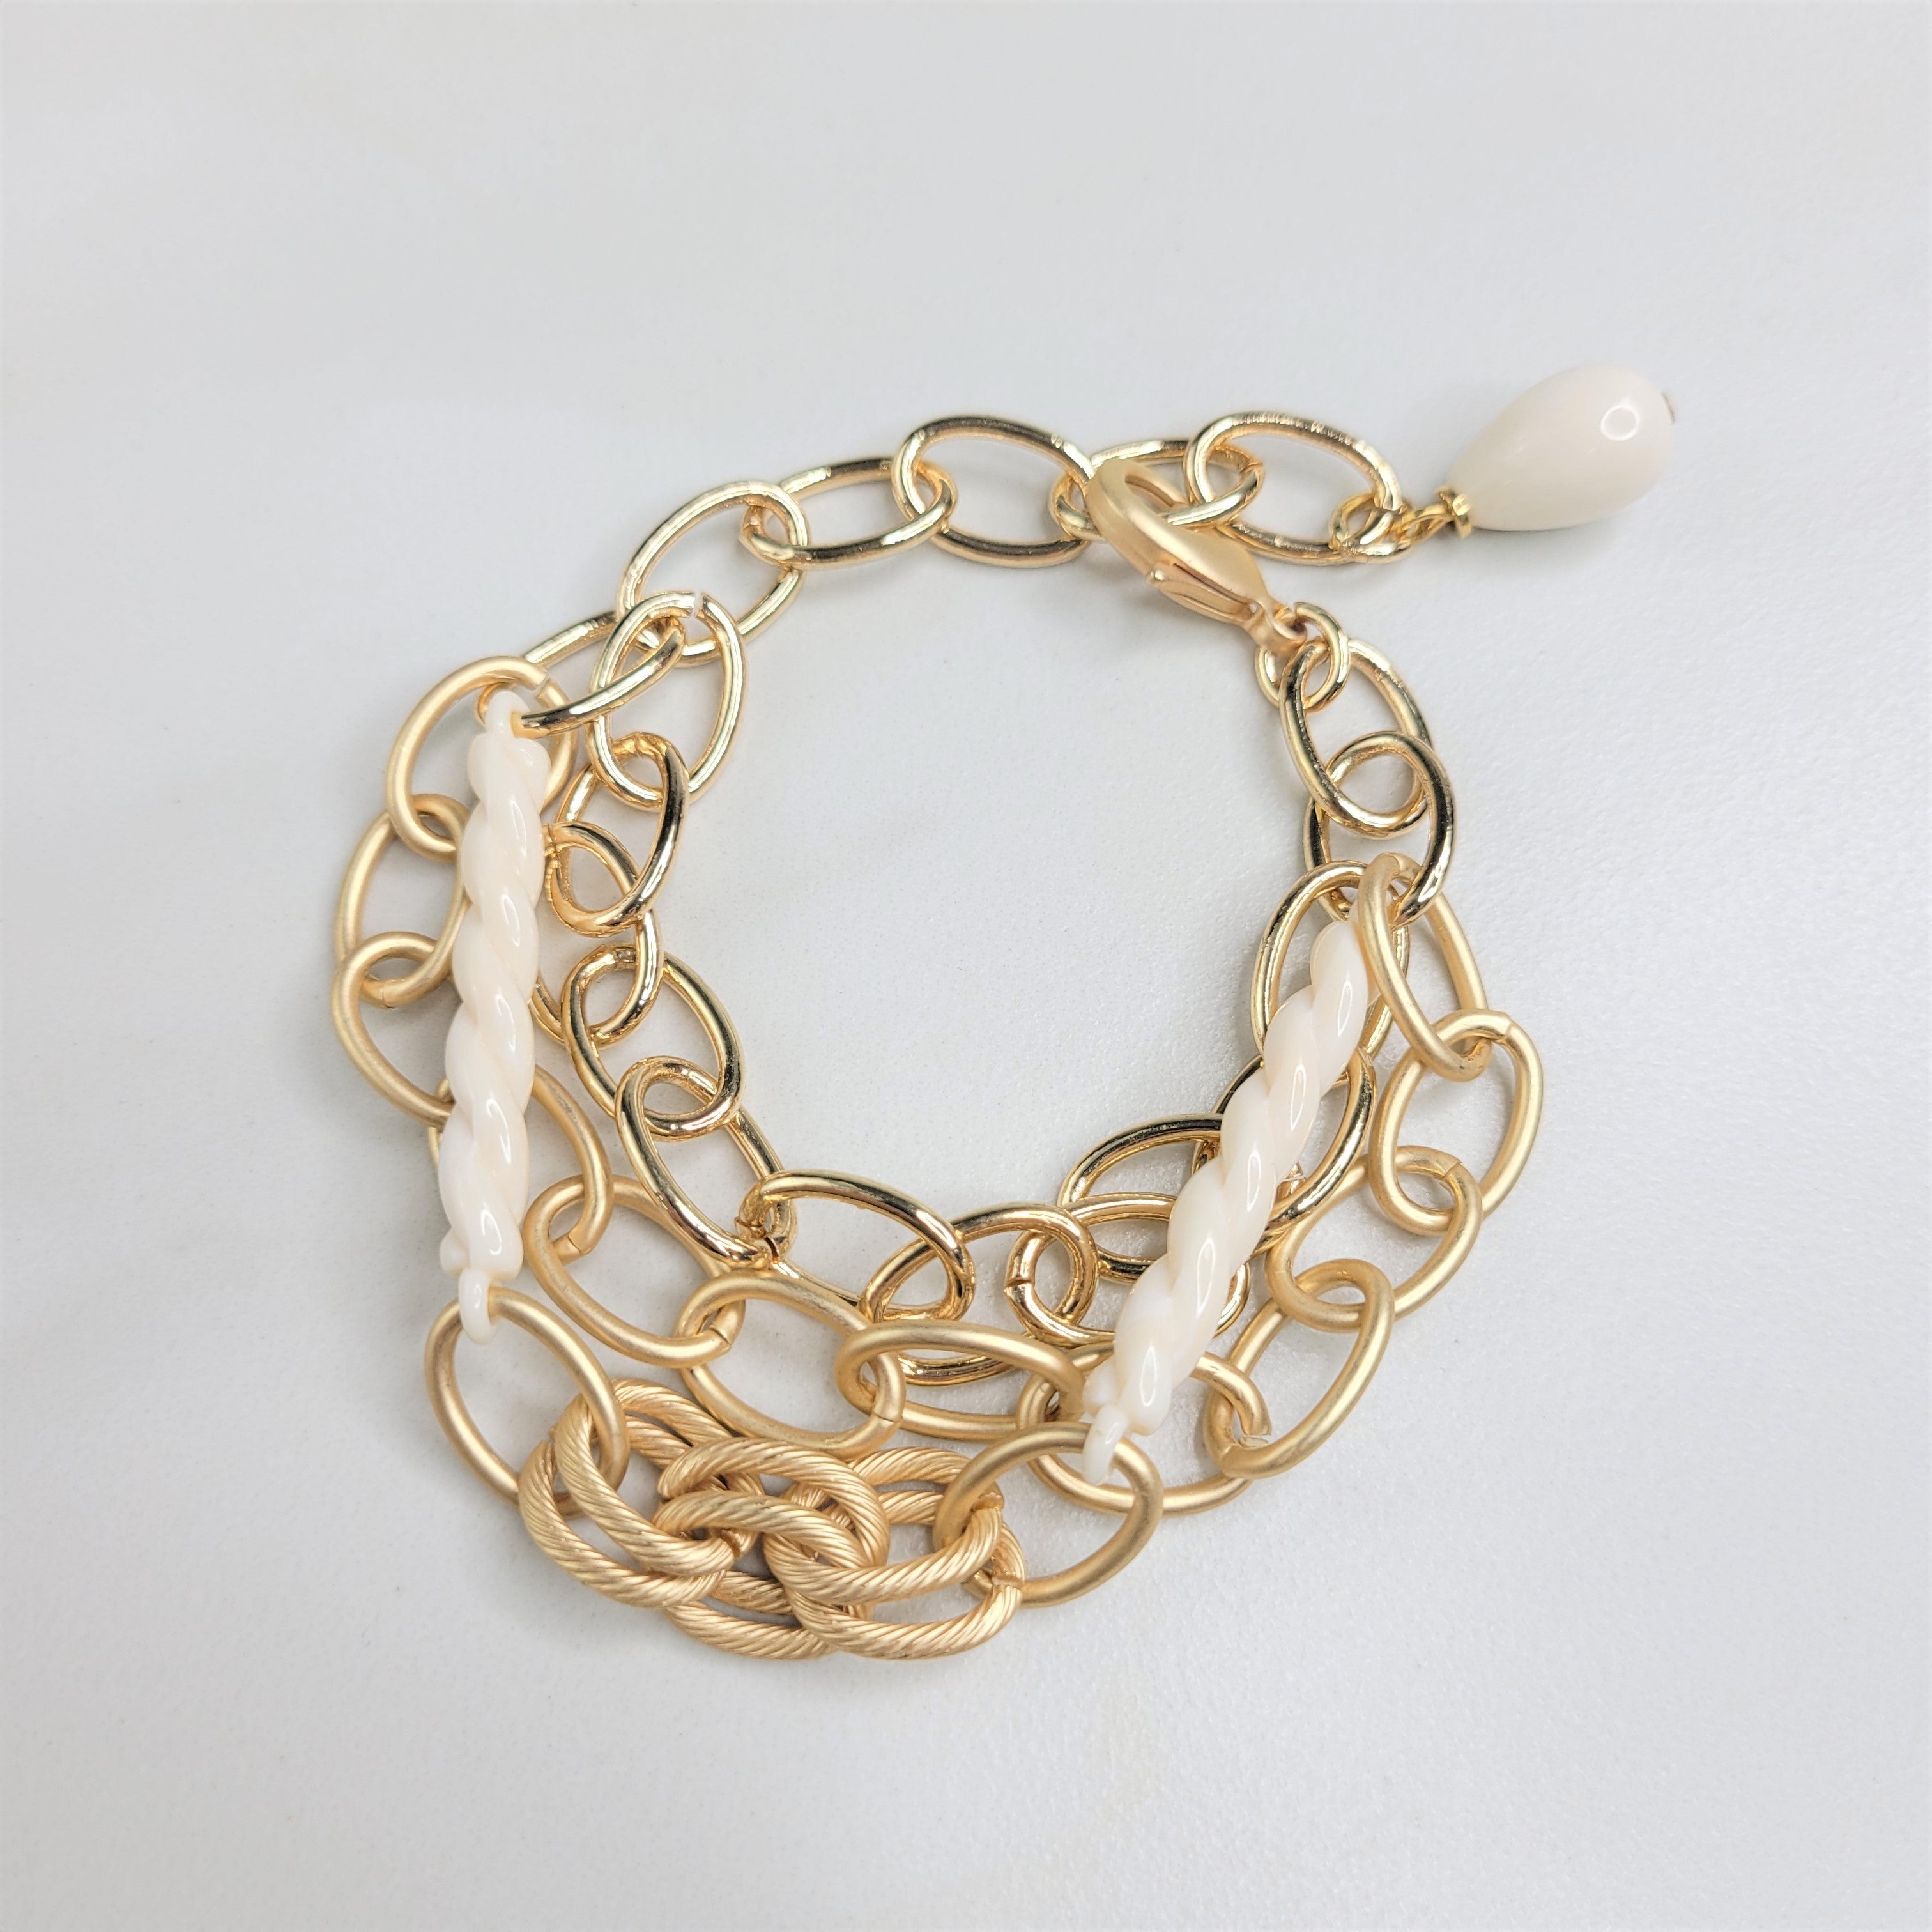 Brooklyn Three Strand Bracelet with Ivory Vintage Elements and Gold Plated Chain